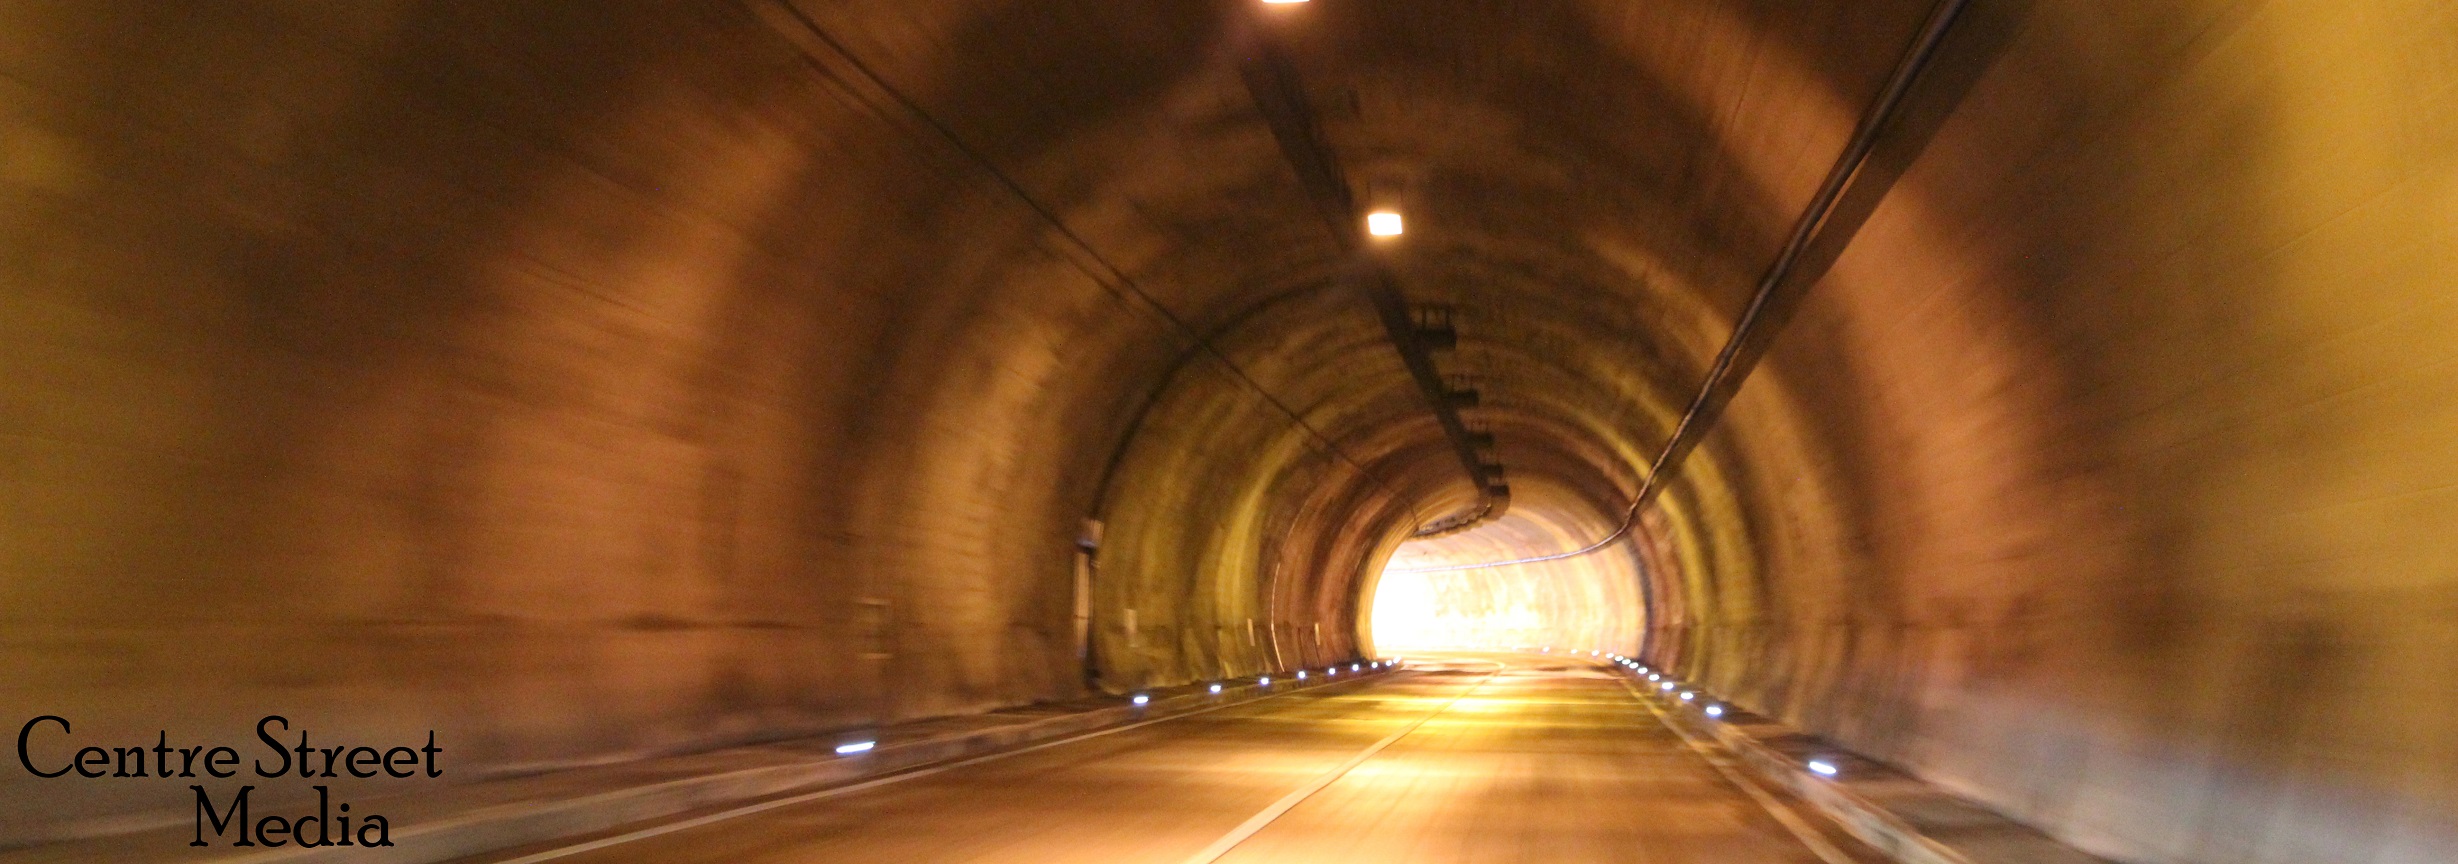 Bergtunnel